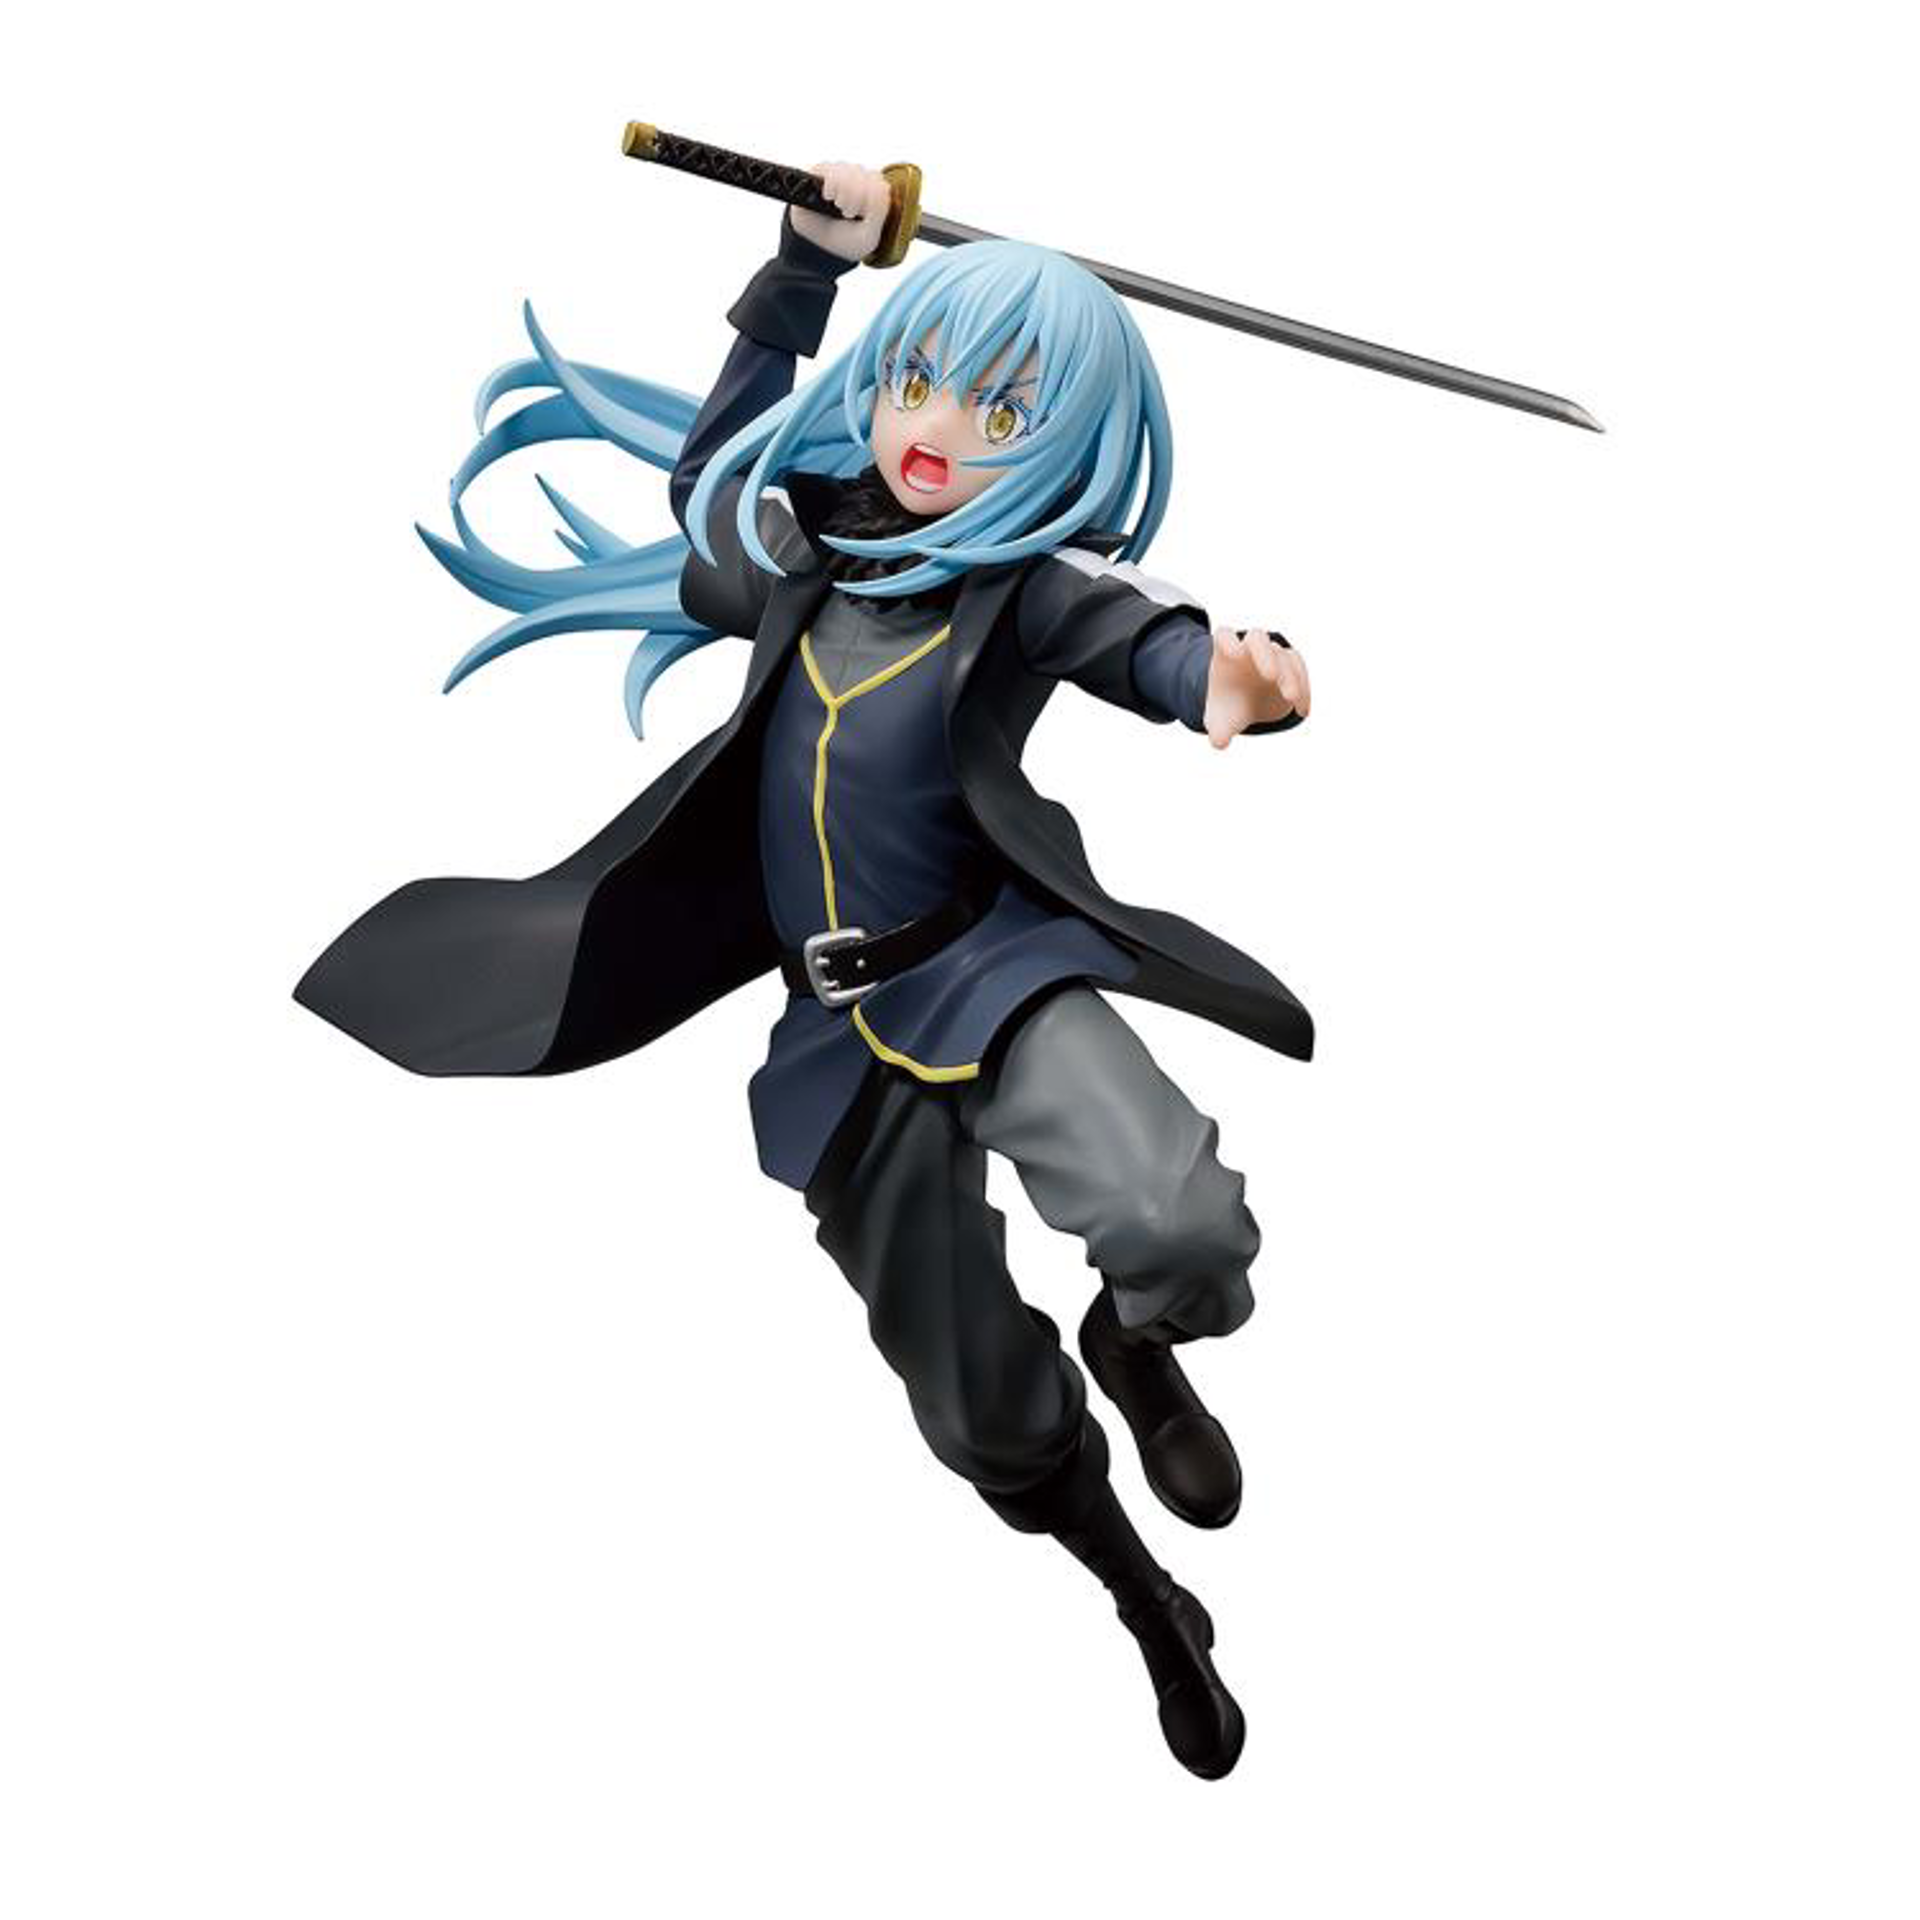 That Time I Got Reincarnated as a Slime - Maximatic - The Rimuru Tempest II Statue 20cm